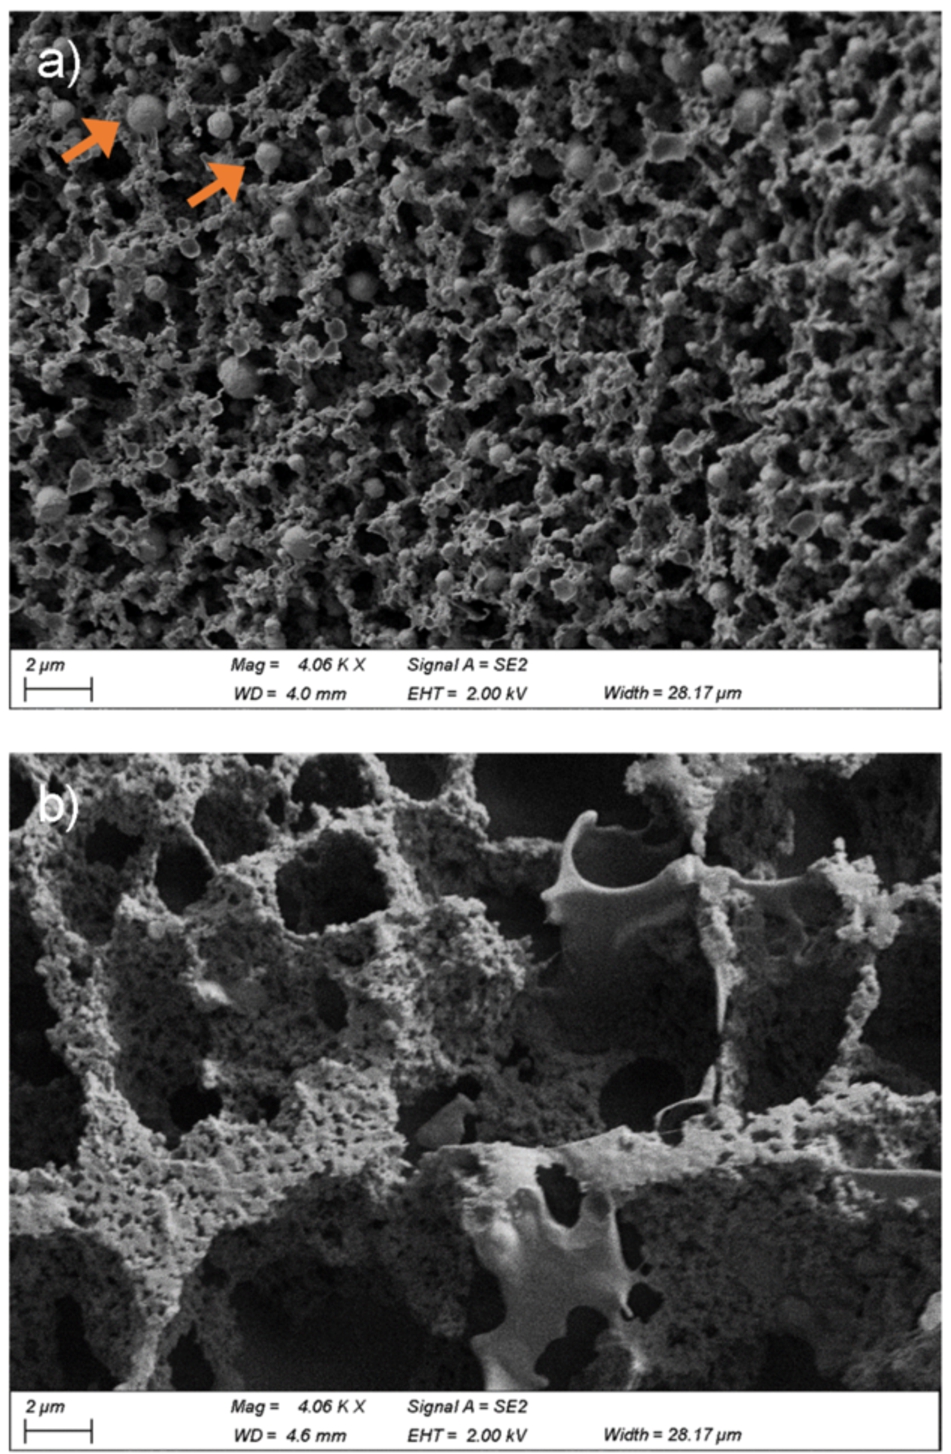 Cryo-SEM micrographs of Greek style full fat (a) and non-fat (b) yoghurts. Orange arrows indicate individual fat globules. Images were taken at approximately 4000× magnification with scale bars 2 μm in length. The colour version is available online.